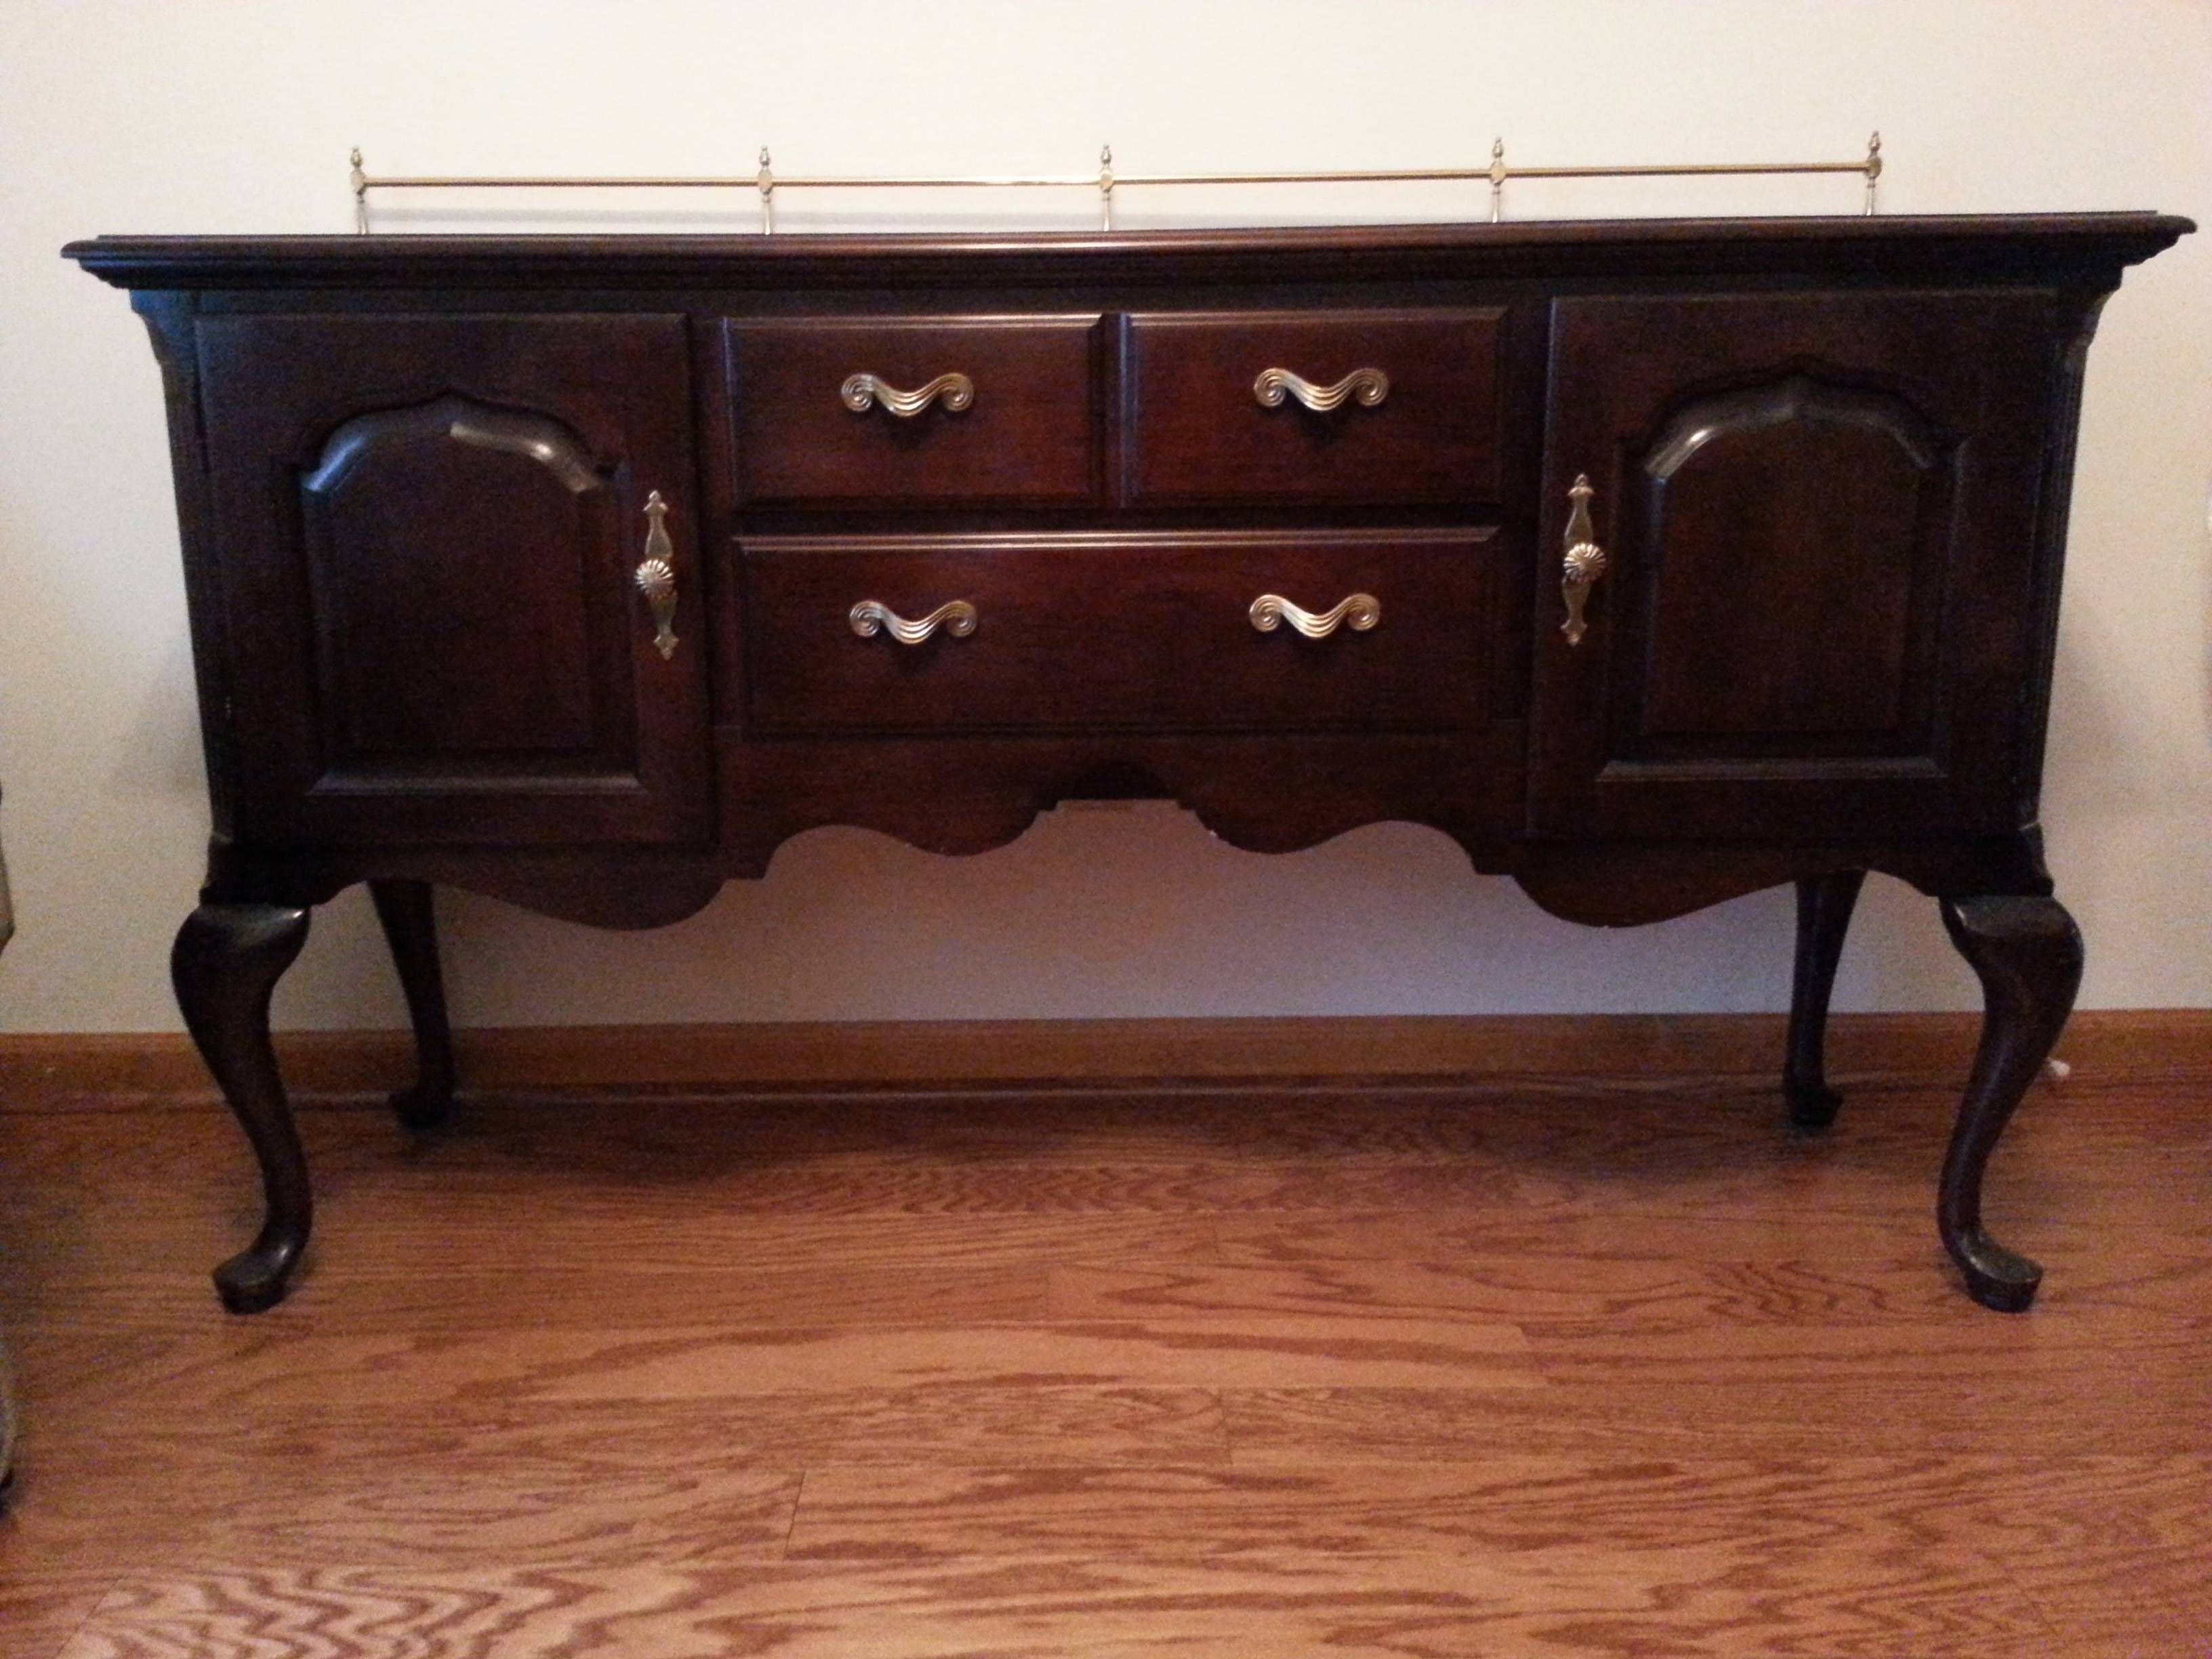 Furniture: Antique Dark Sideboard Buffet With Three Drawers On With Regard To Sideboard Buffet Servers (View 6 of 15)